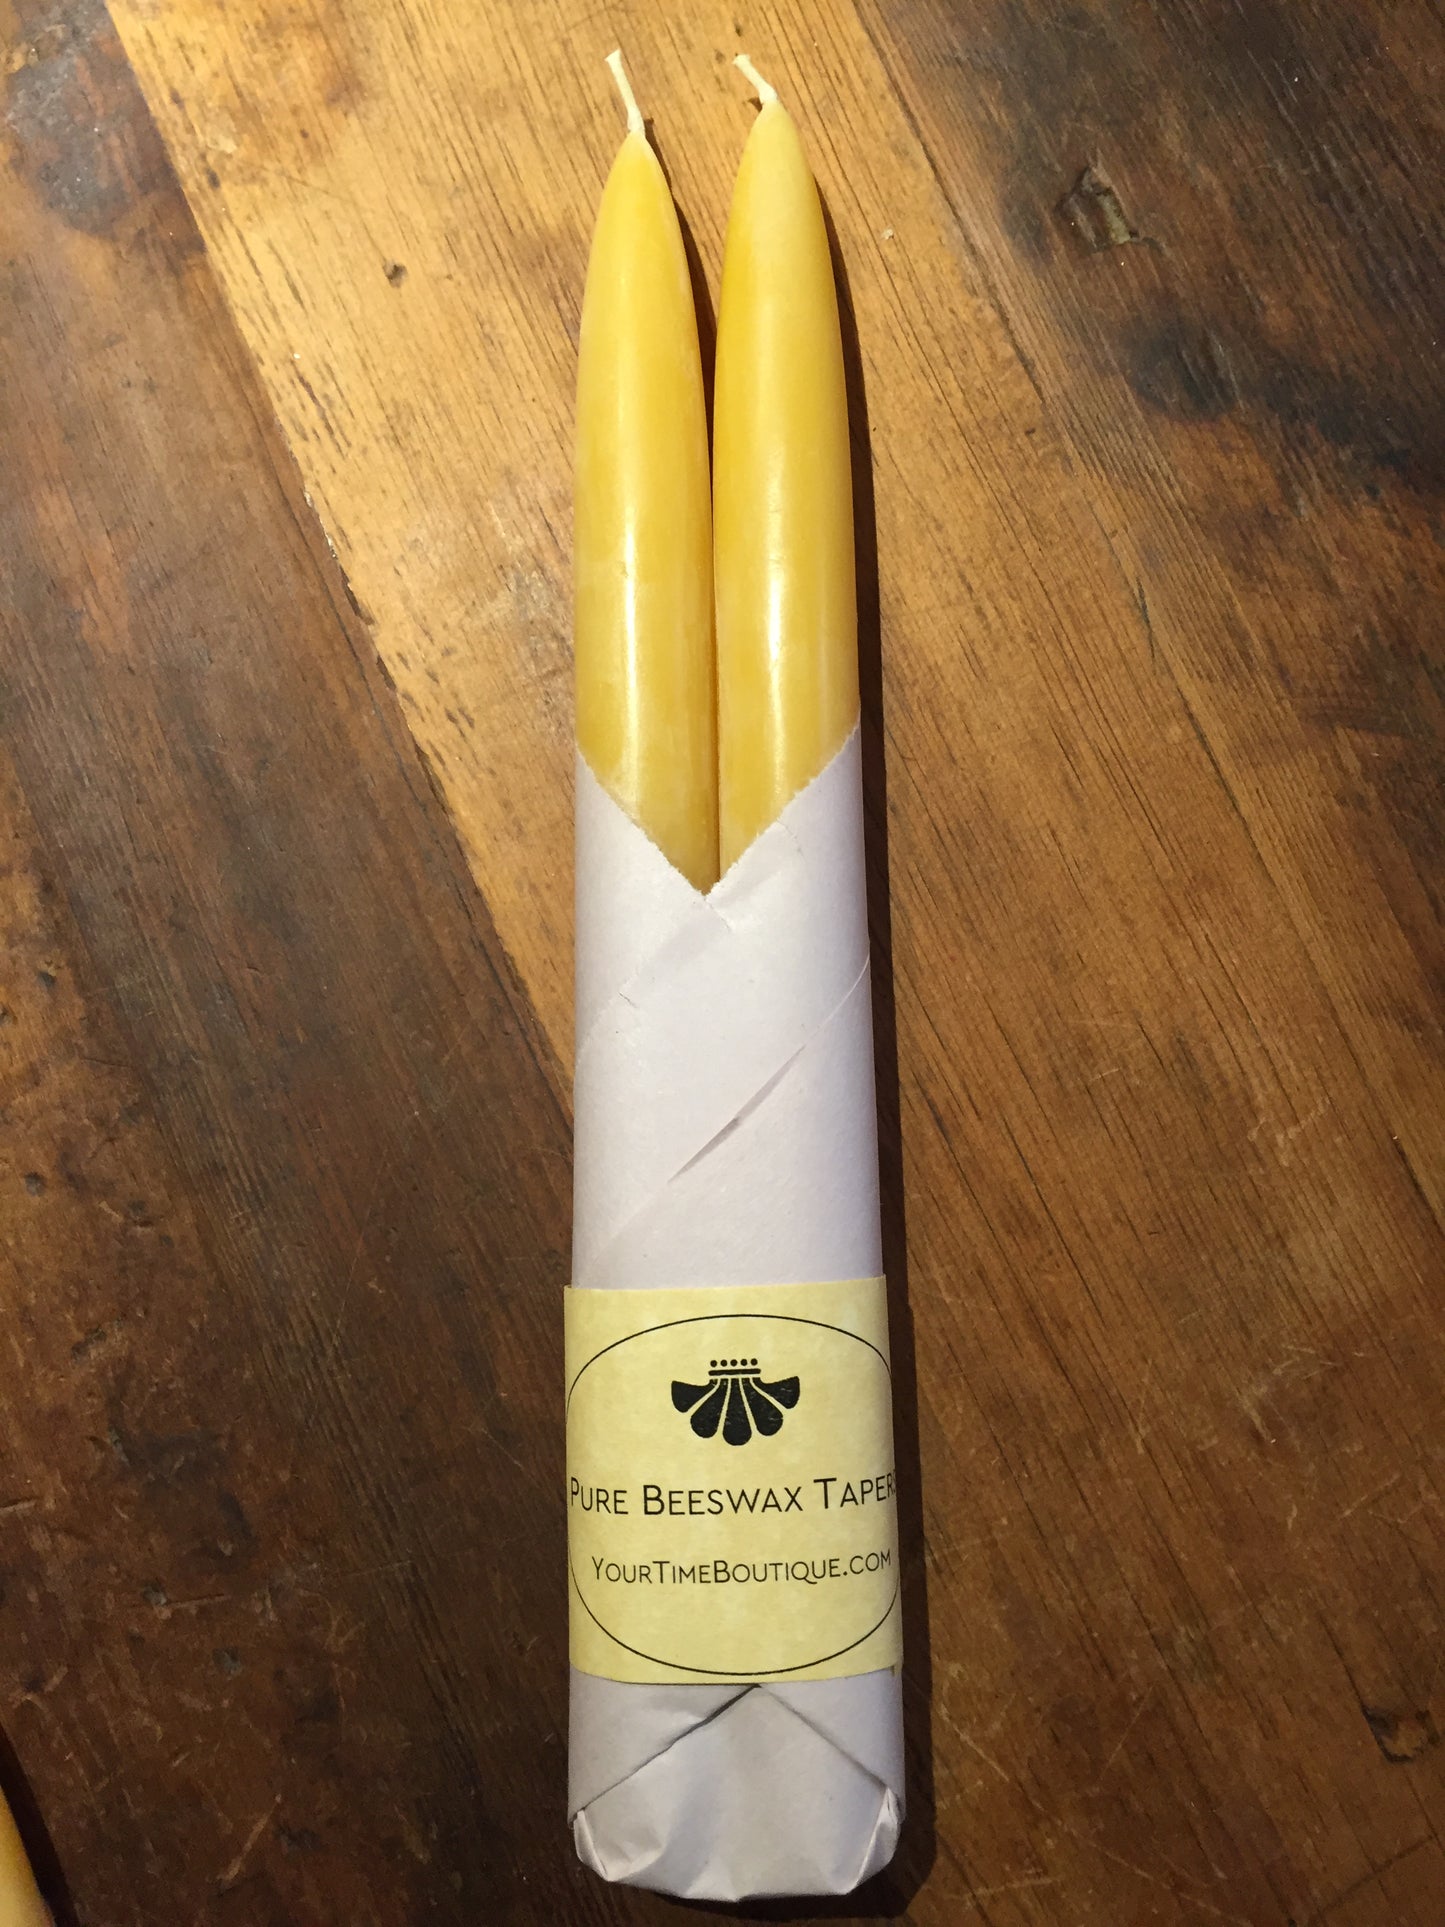 Beeswax Candles - 10 INCH TAPER PAIR